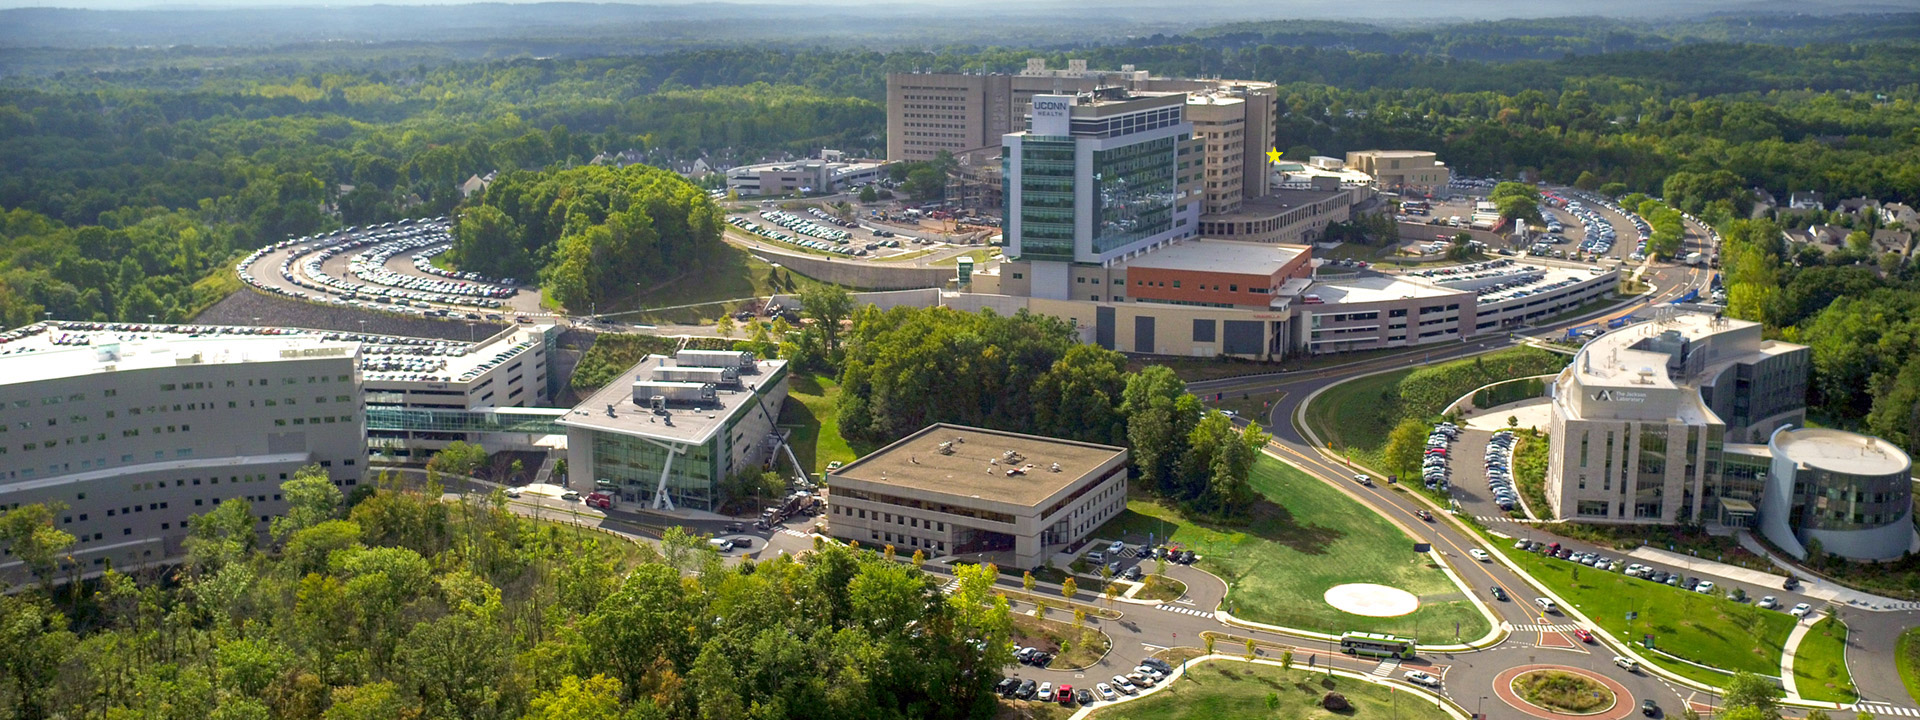 Aerial view of UConn Health with a gold star showing the location of our lab